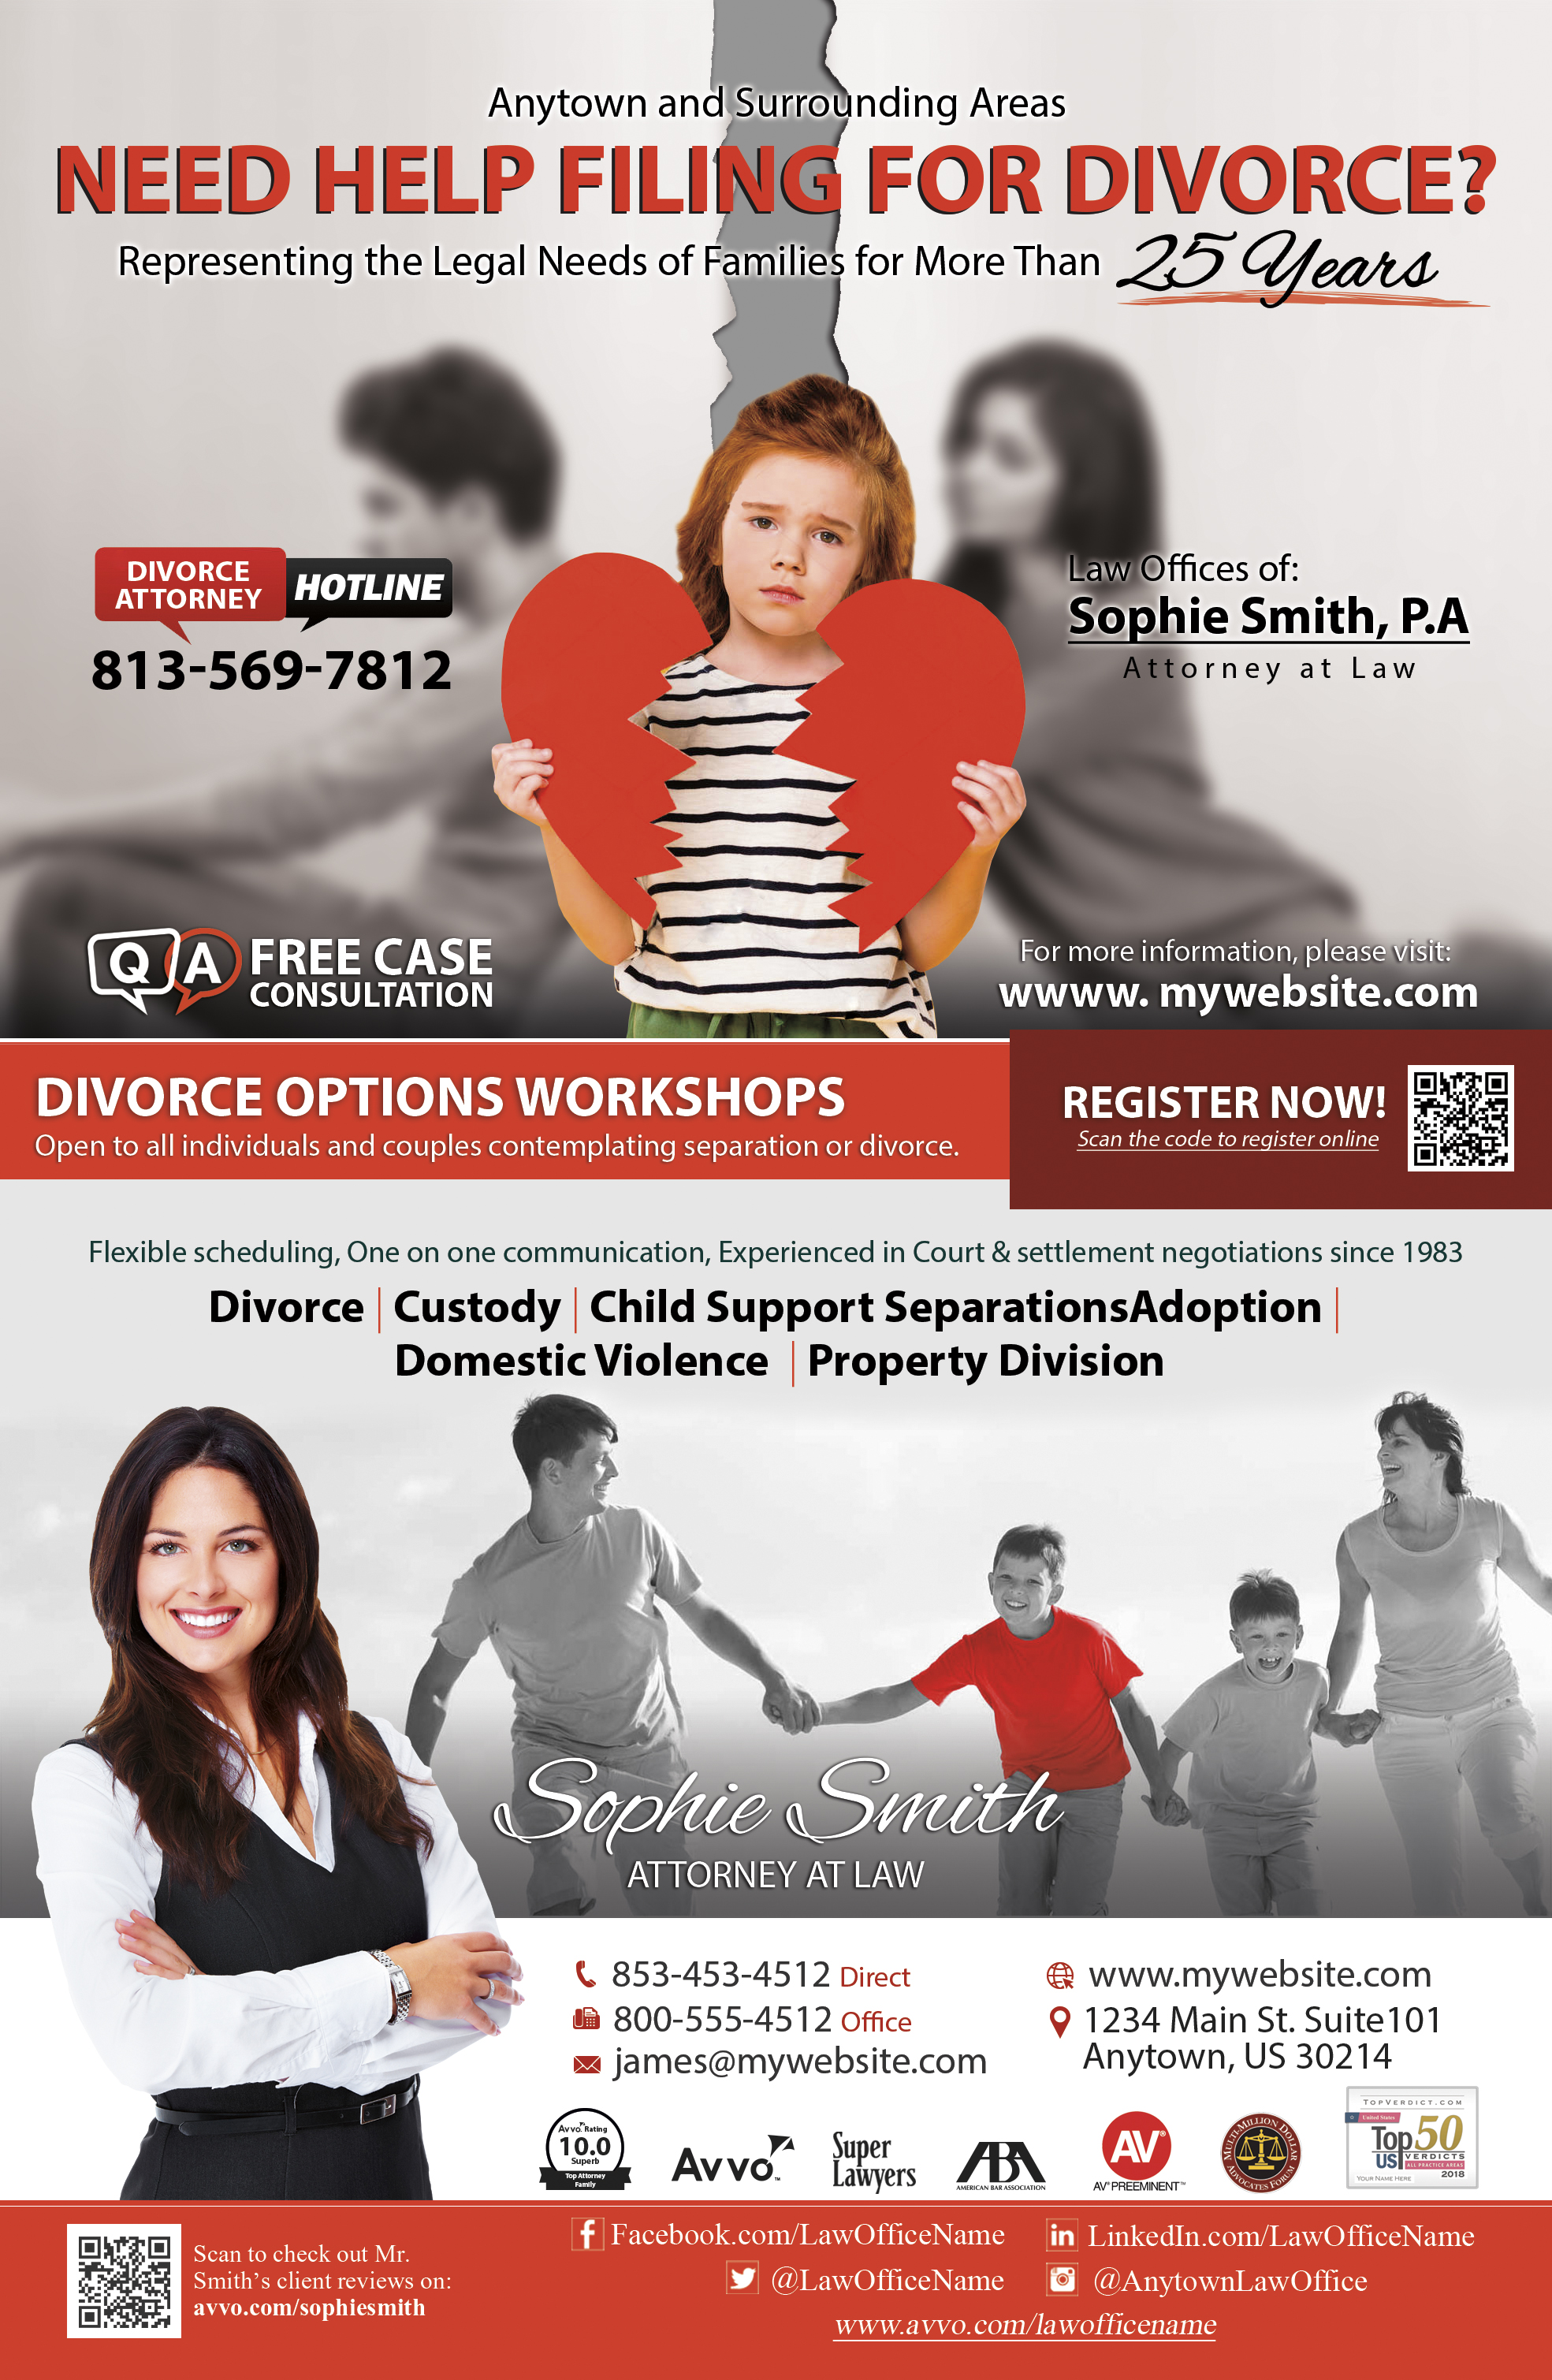 Family Law Flyers, Divorce Flyers, Lawyer Flyers, Law Firm Flyers, Attorney Flyers, Legal Flyers, Law Office Flyers